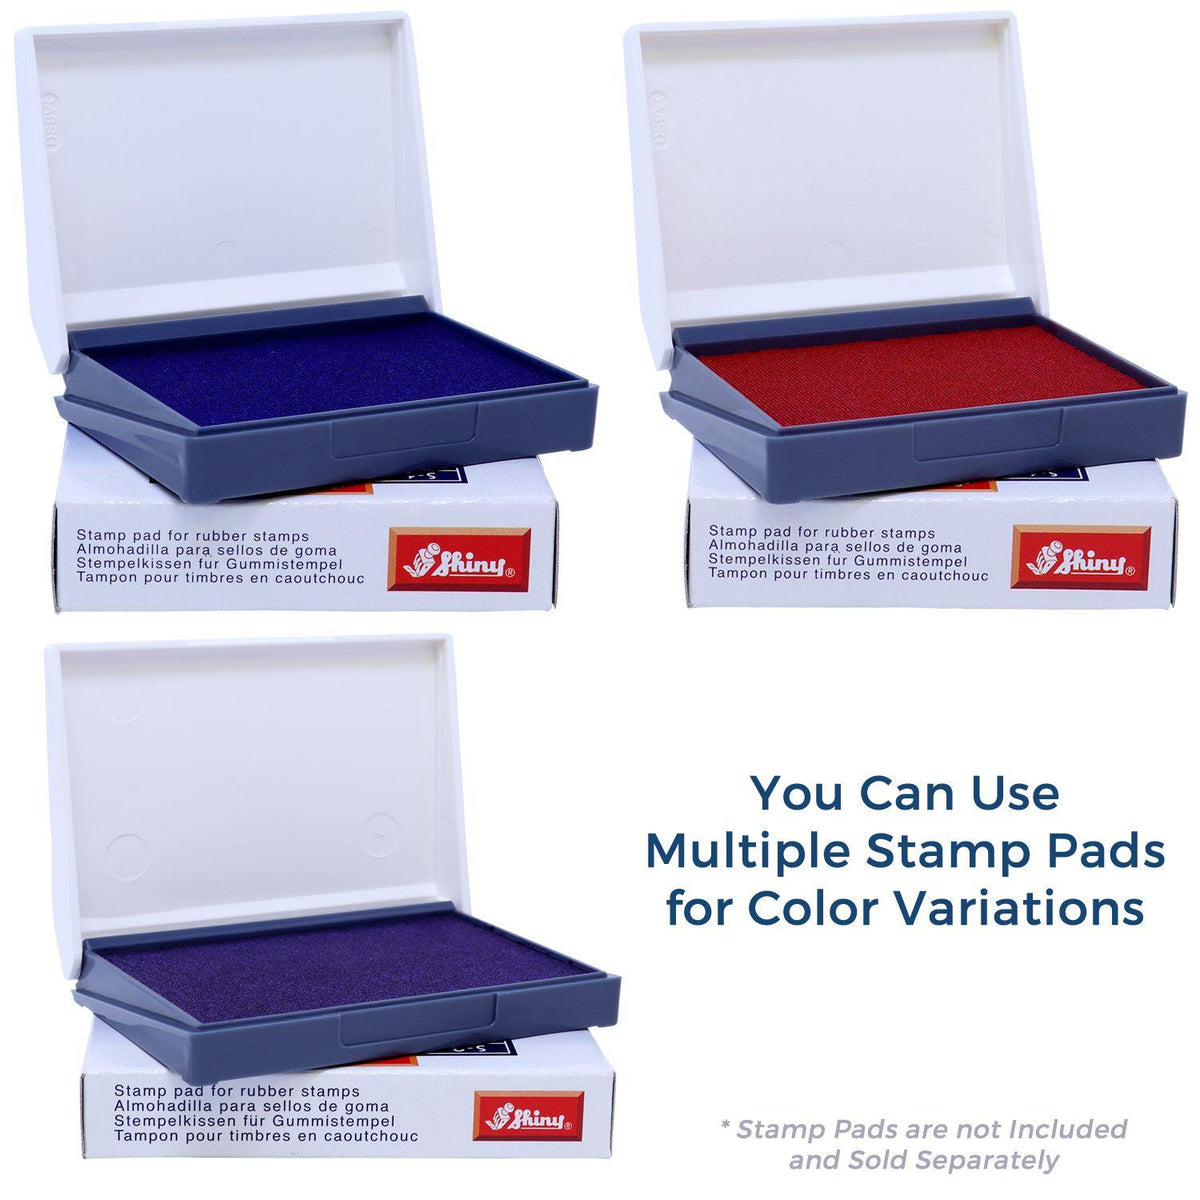 Stamp Pads for Dismissal Rubber Stamp Available